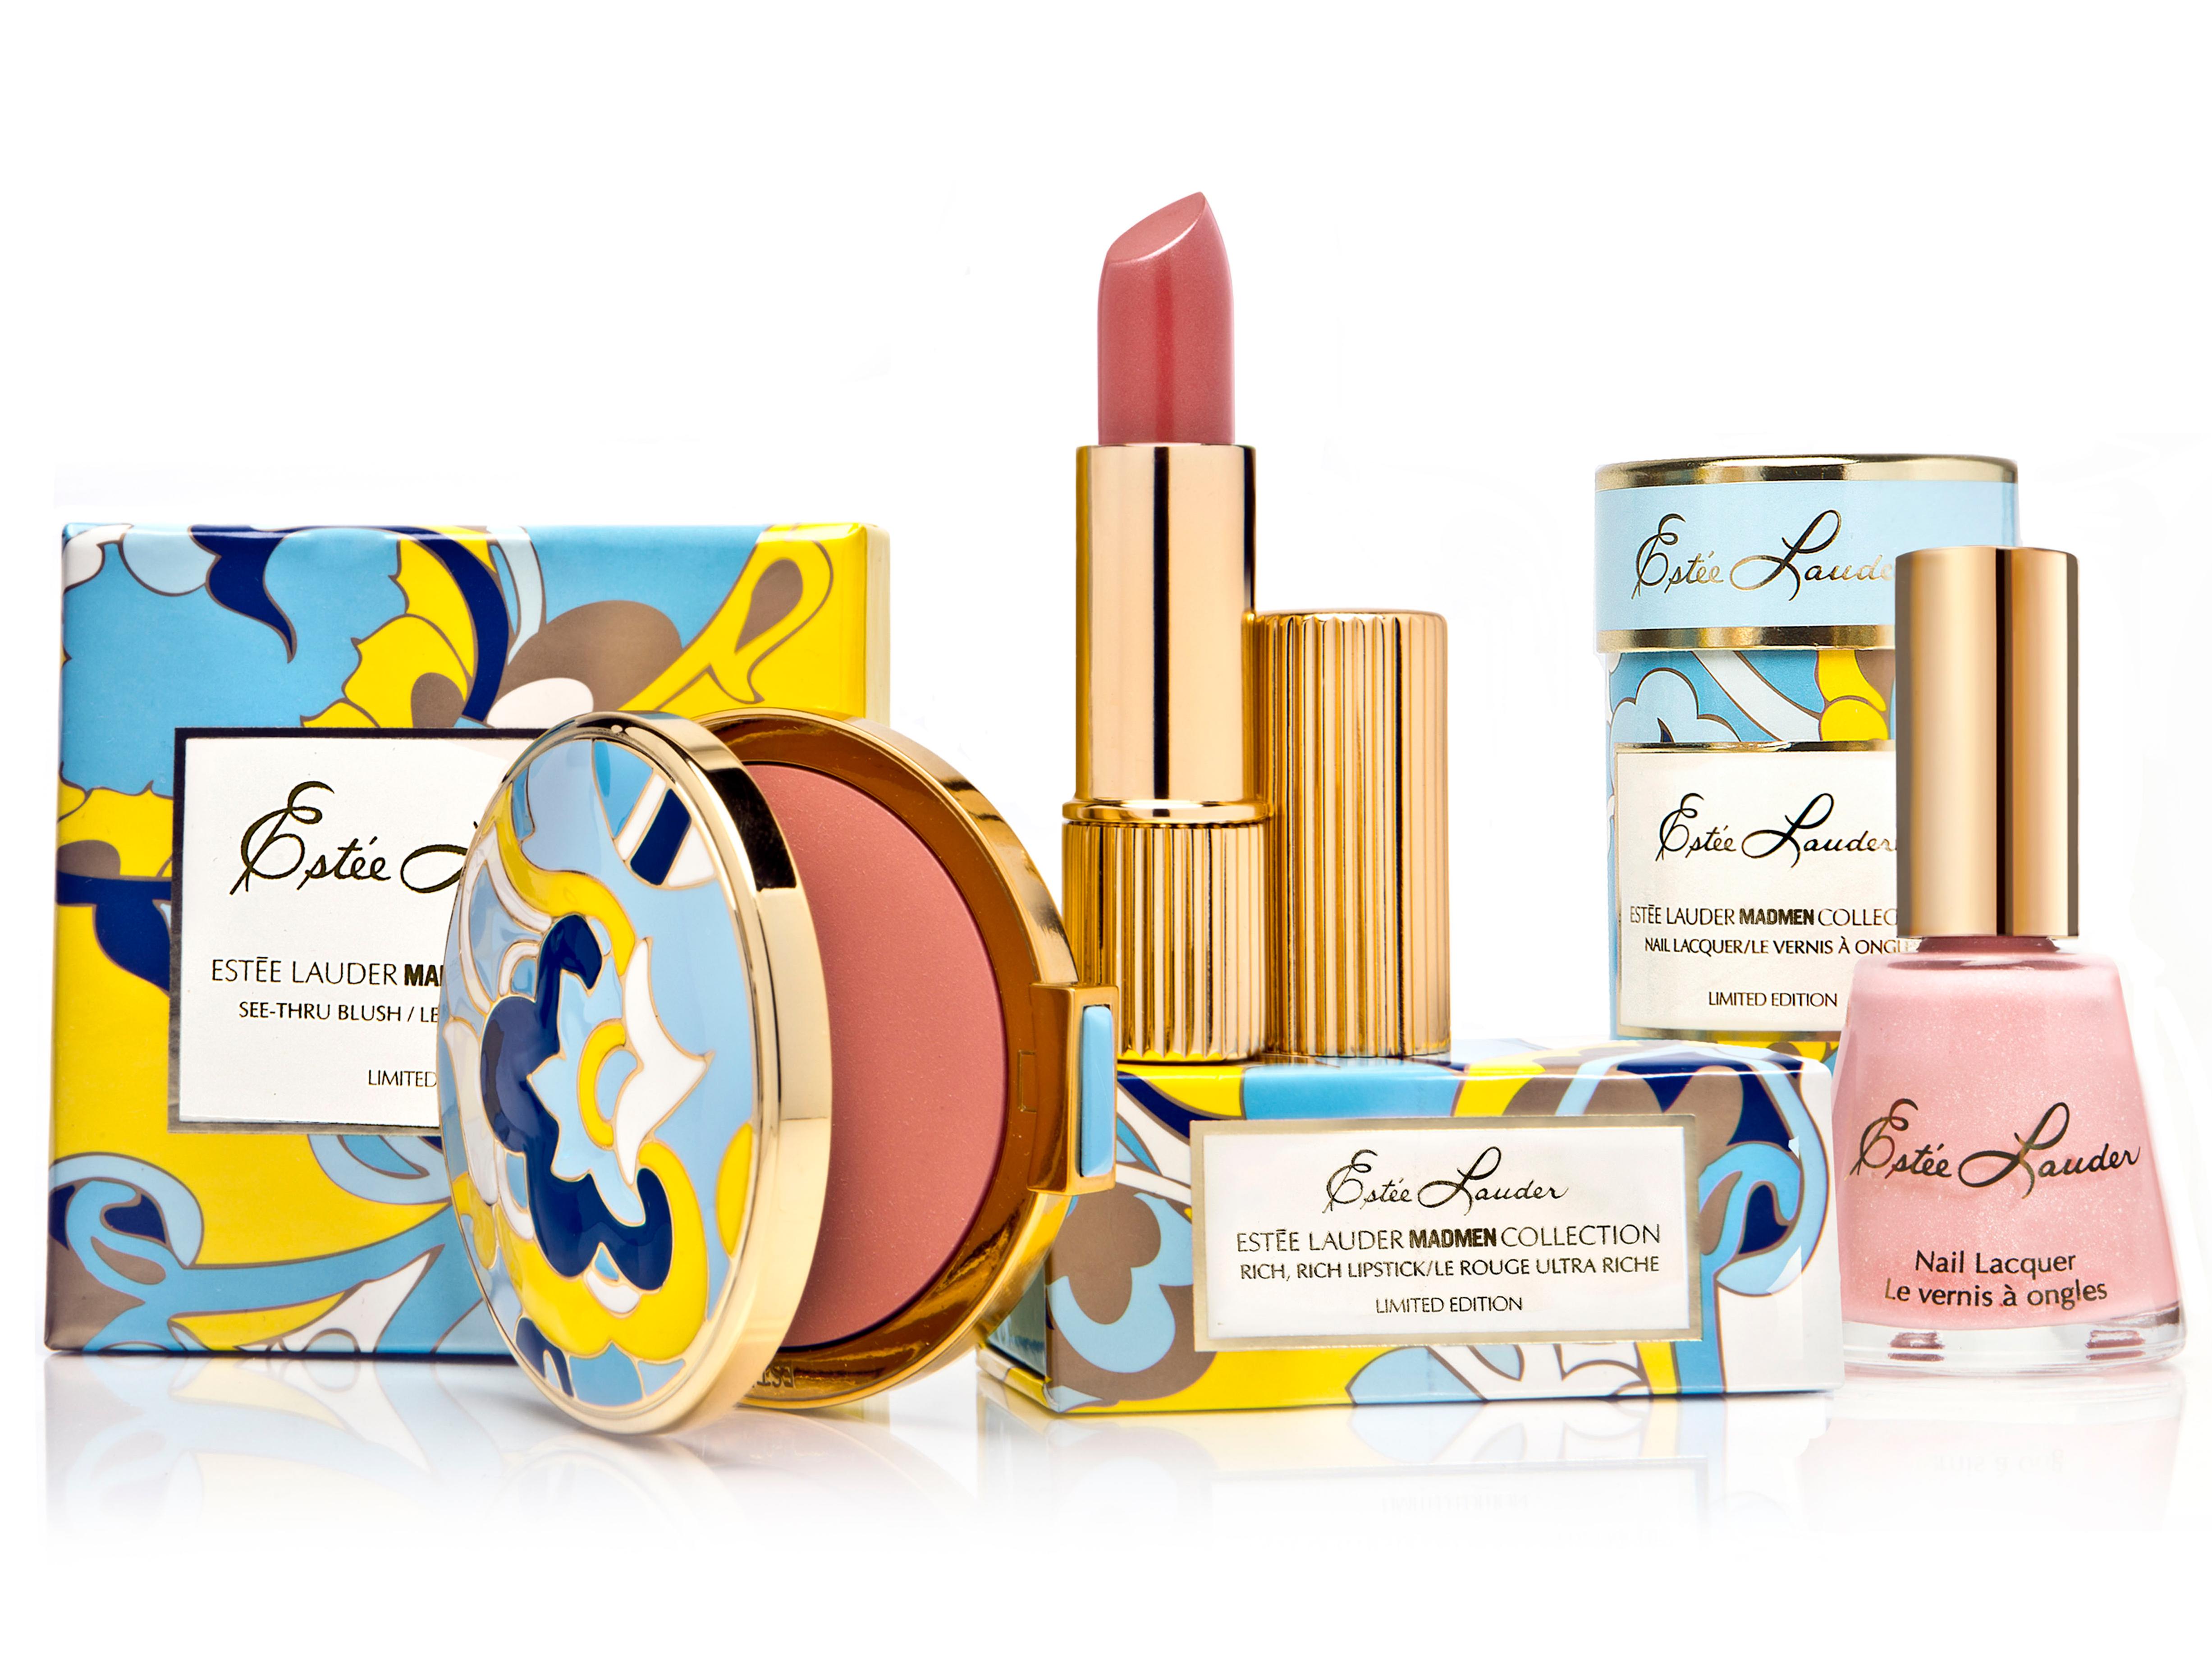 Ok_estee lauder mad men collection_spring 2013_with box_0.jpg